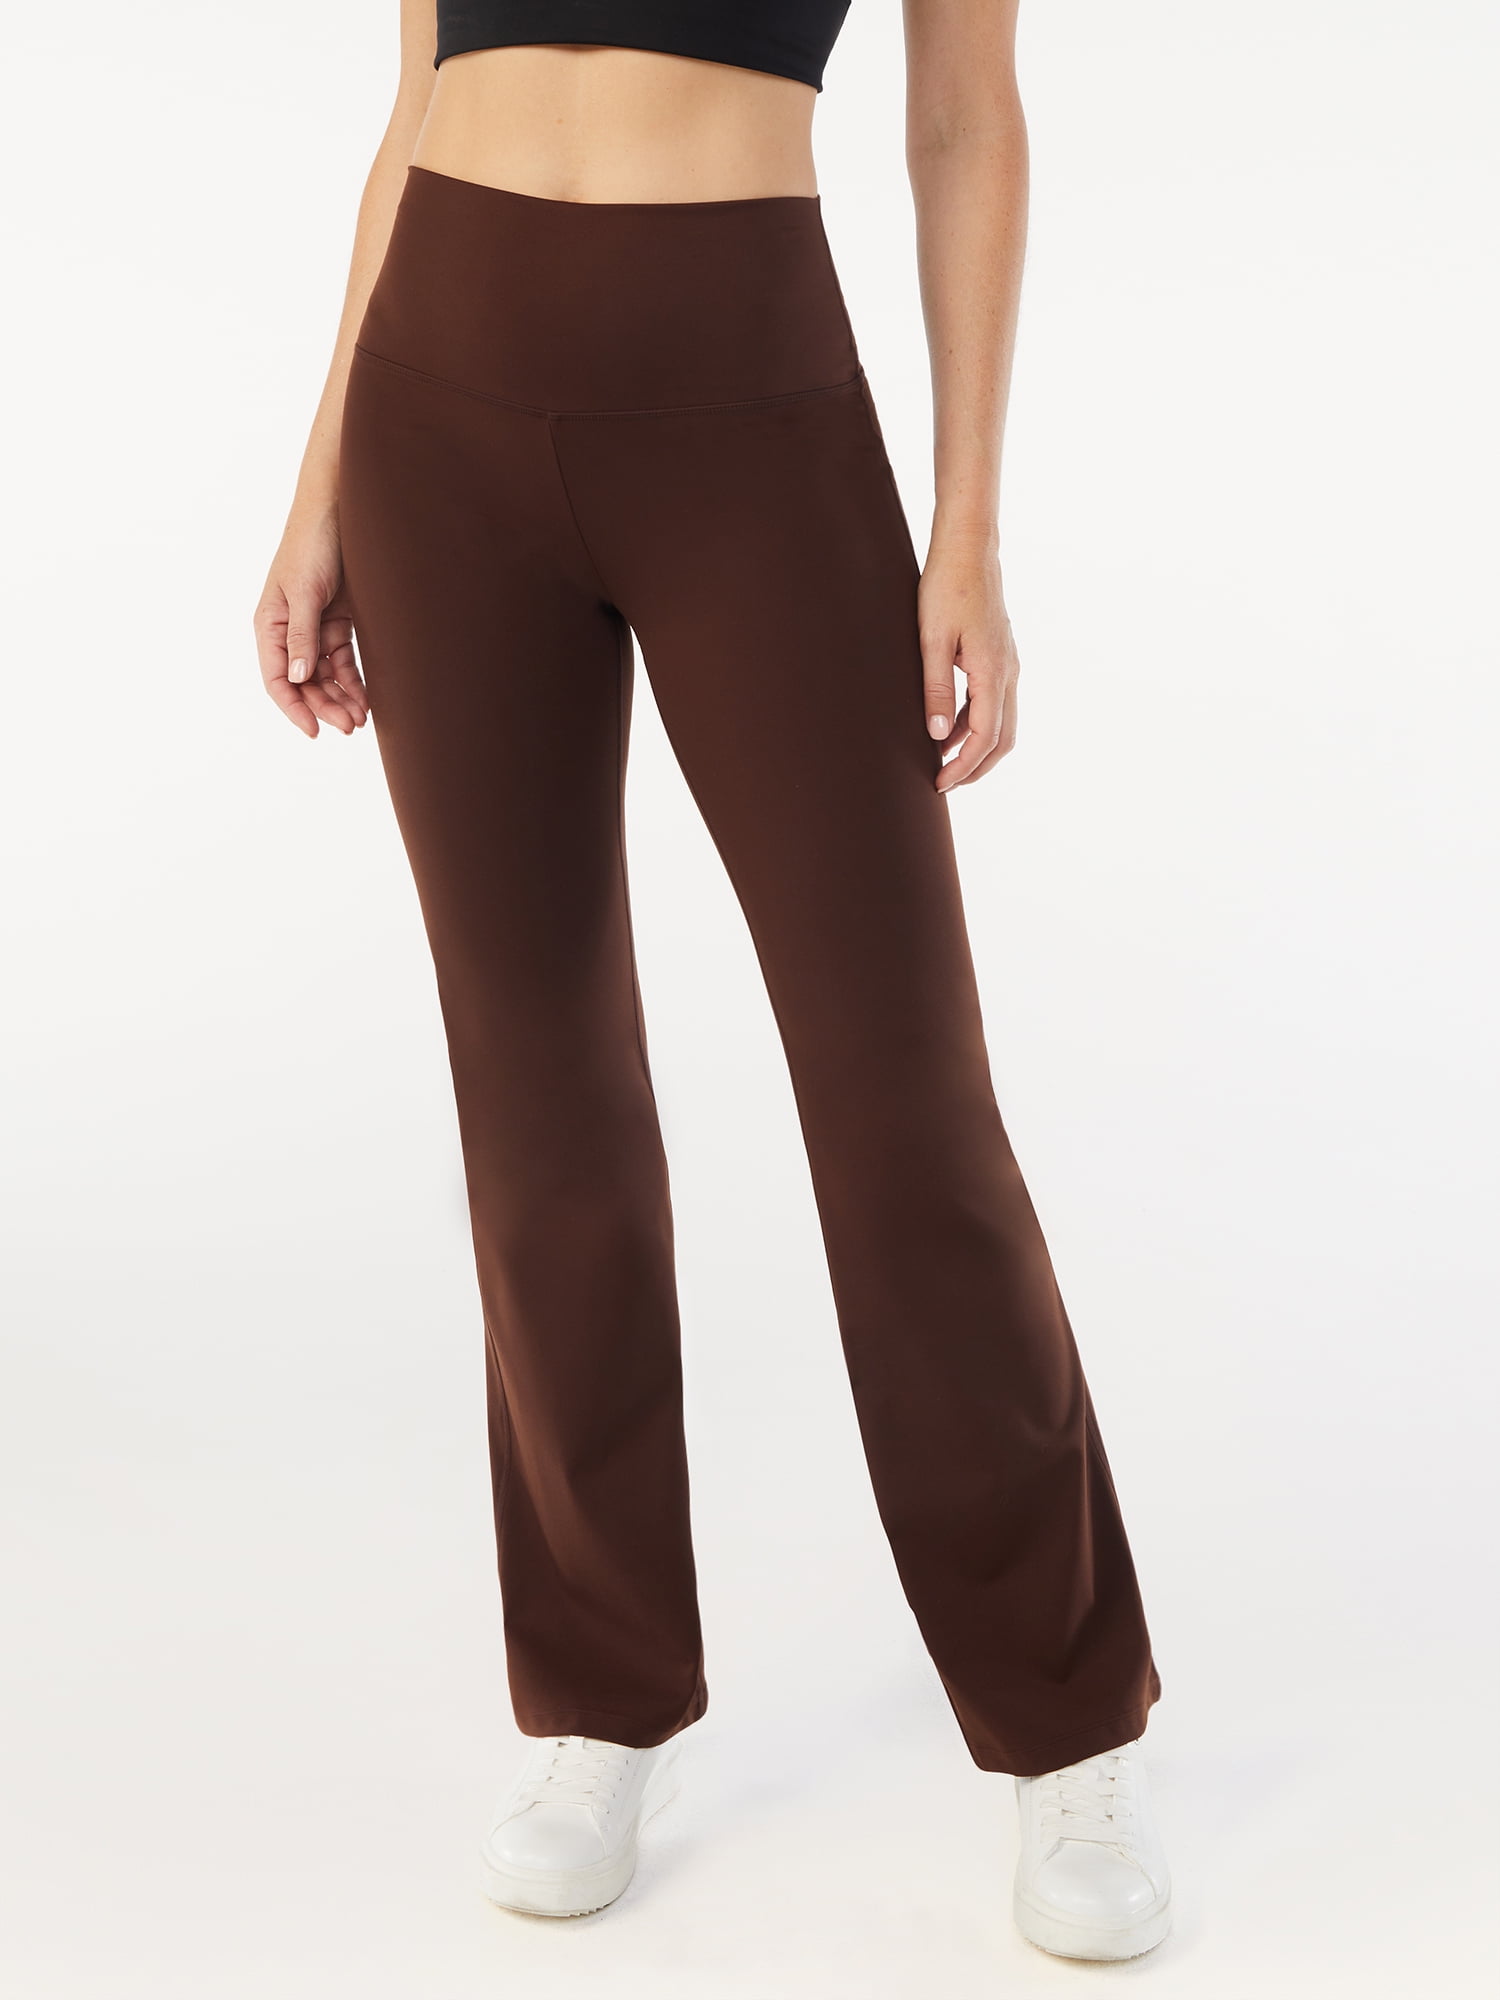 Designer Flare Skinny Brown Flare Leggings For Women Full Length, Mid  Elastic Waist, Plus Size XXXL Ideal For Jogging, Workouts, And Active Wear  From Designershirt777, $21.5